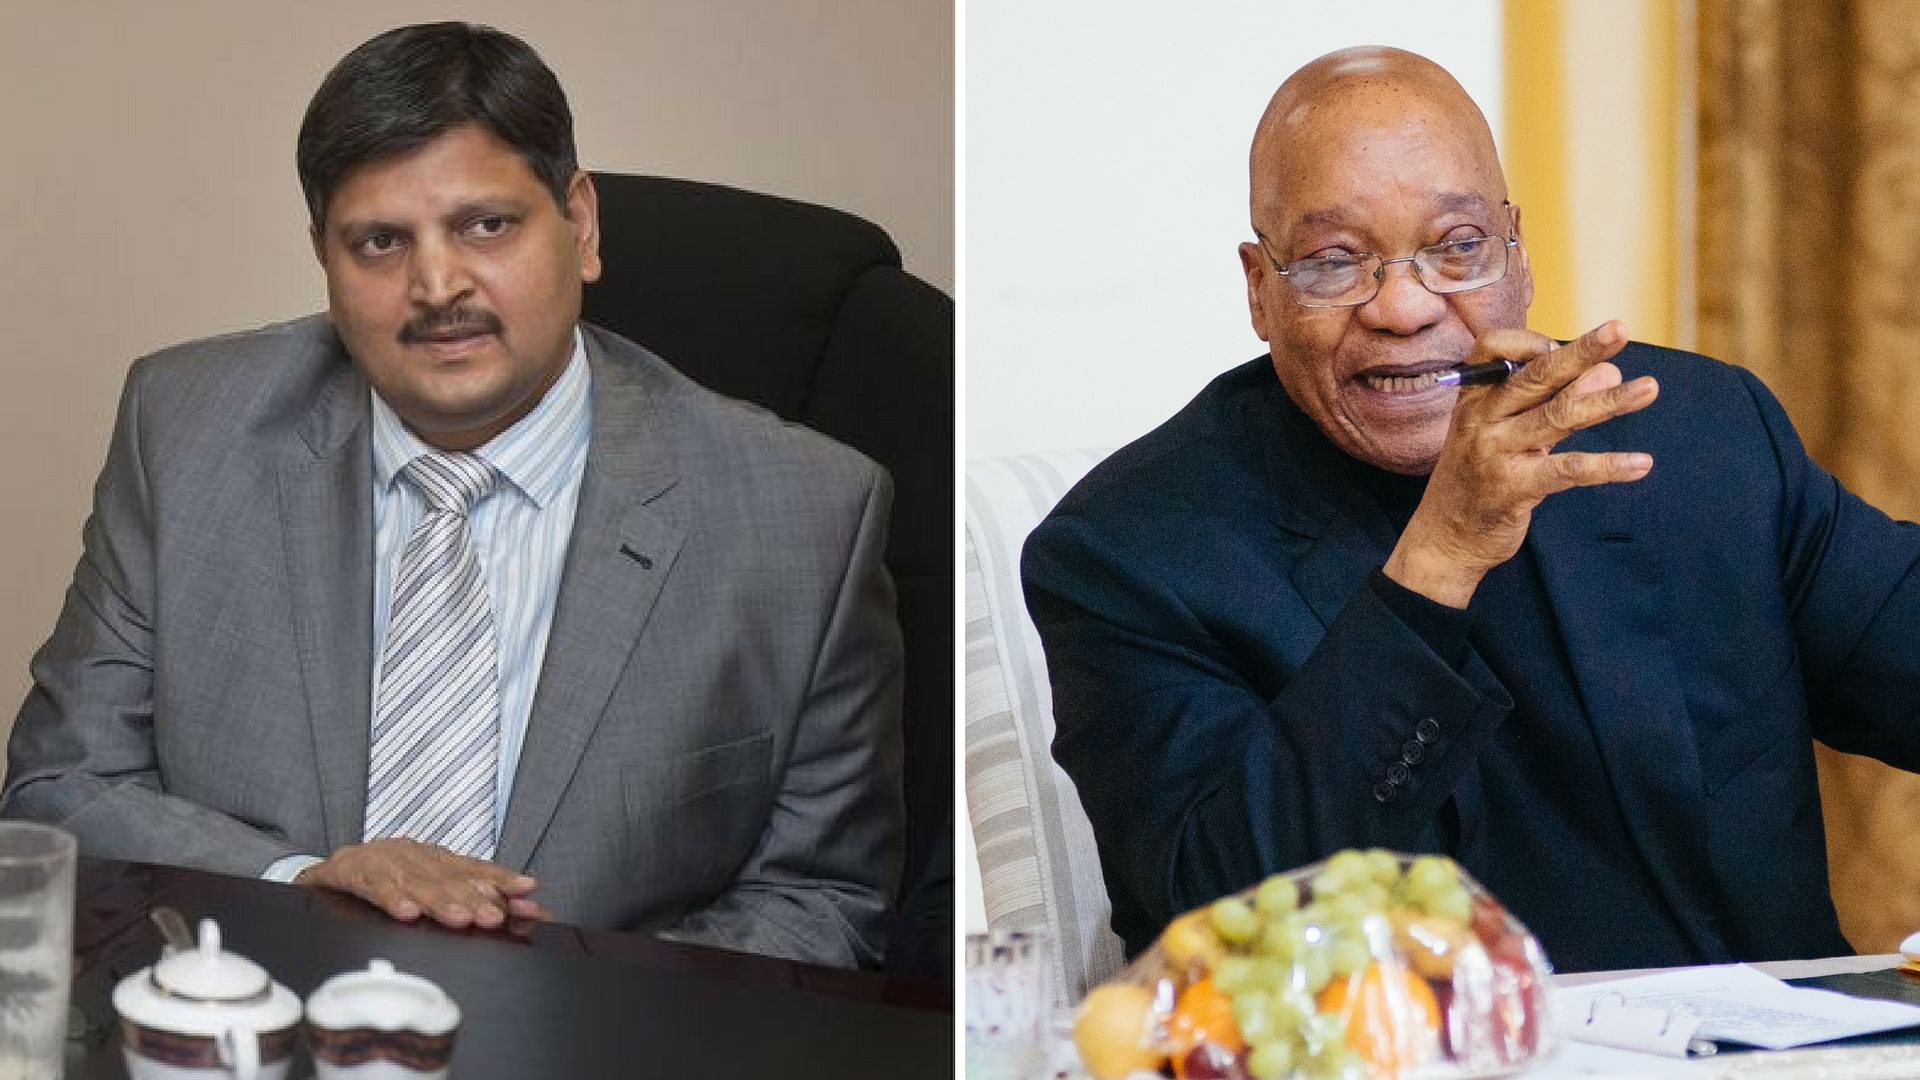 Indian tax inspectors raided premises of the Gupta family, which is at the centre of a corruption scandal involving South Africa’s former president Jacob Zuma.